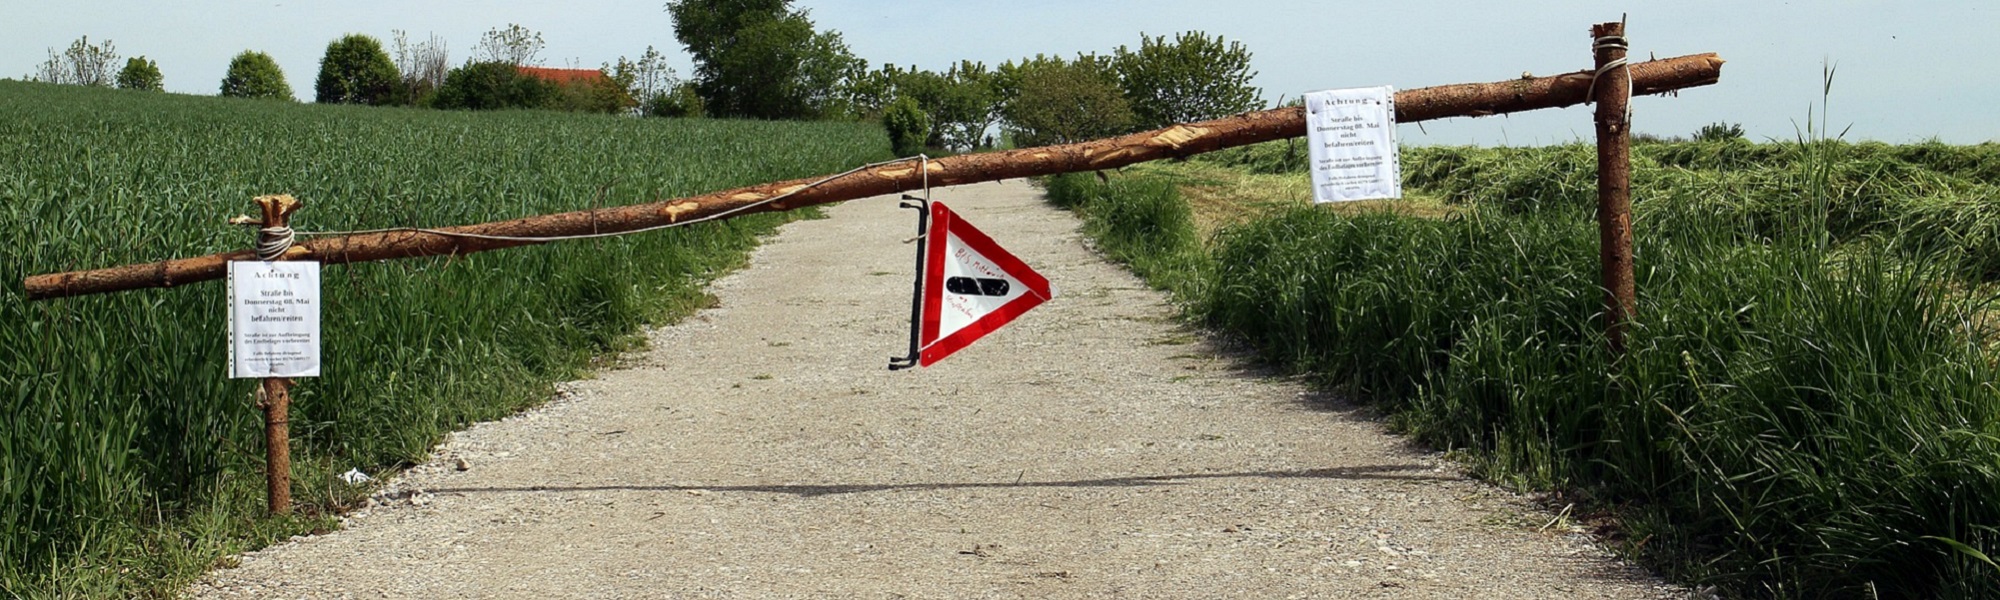 A country road blocked by wooden posts with a warning sign 